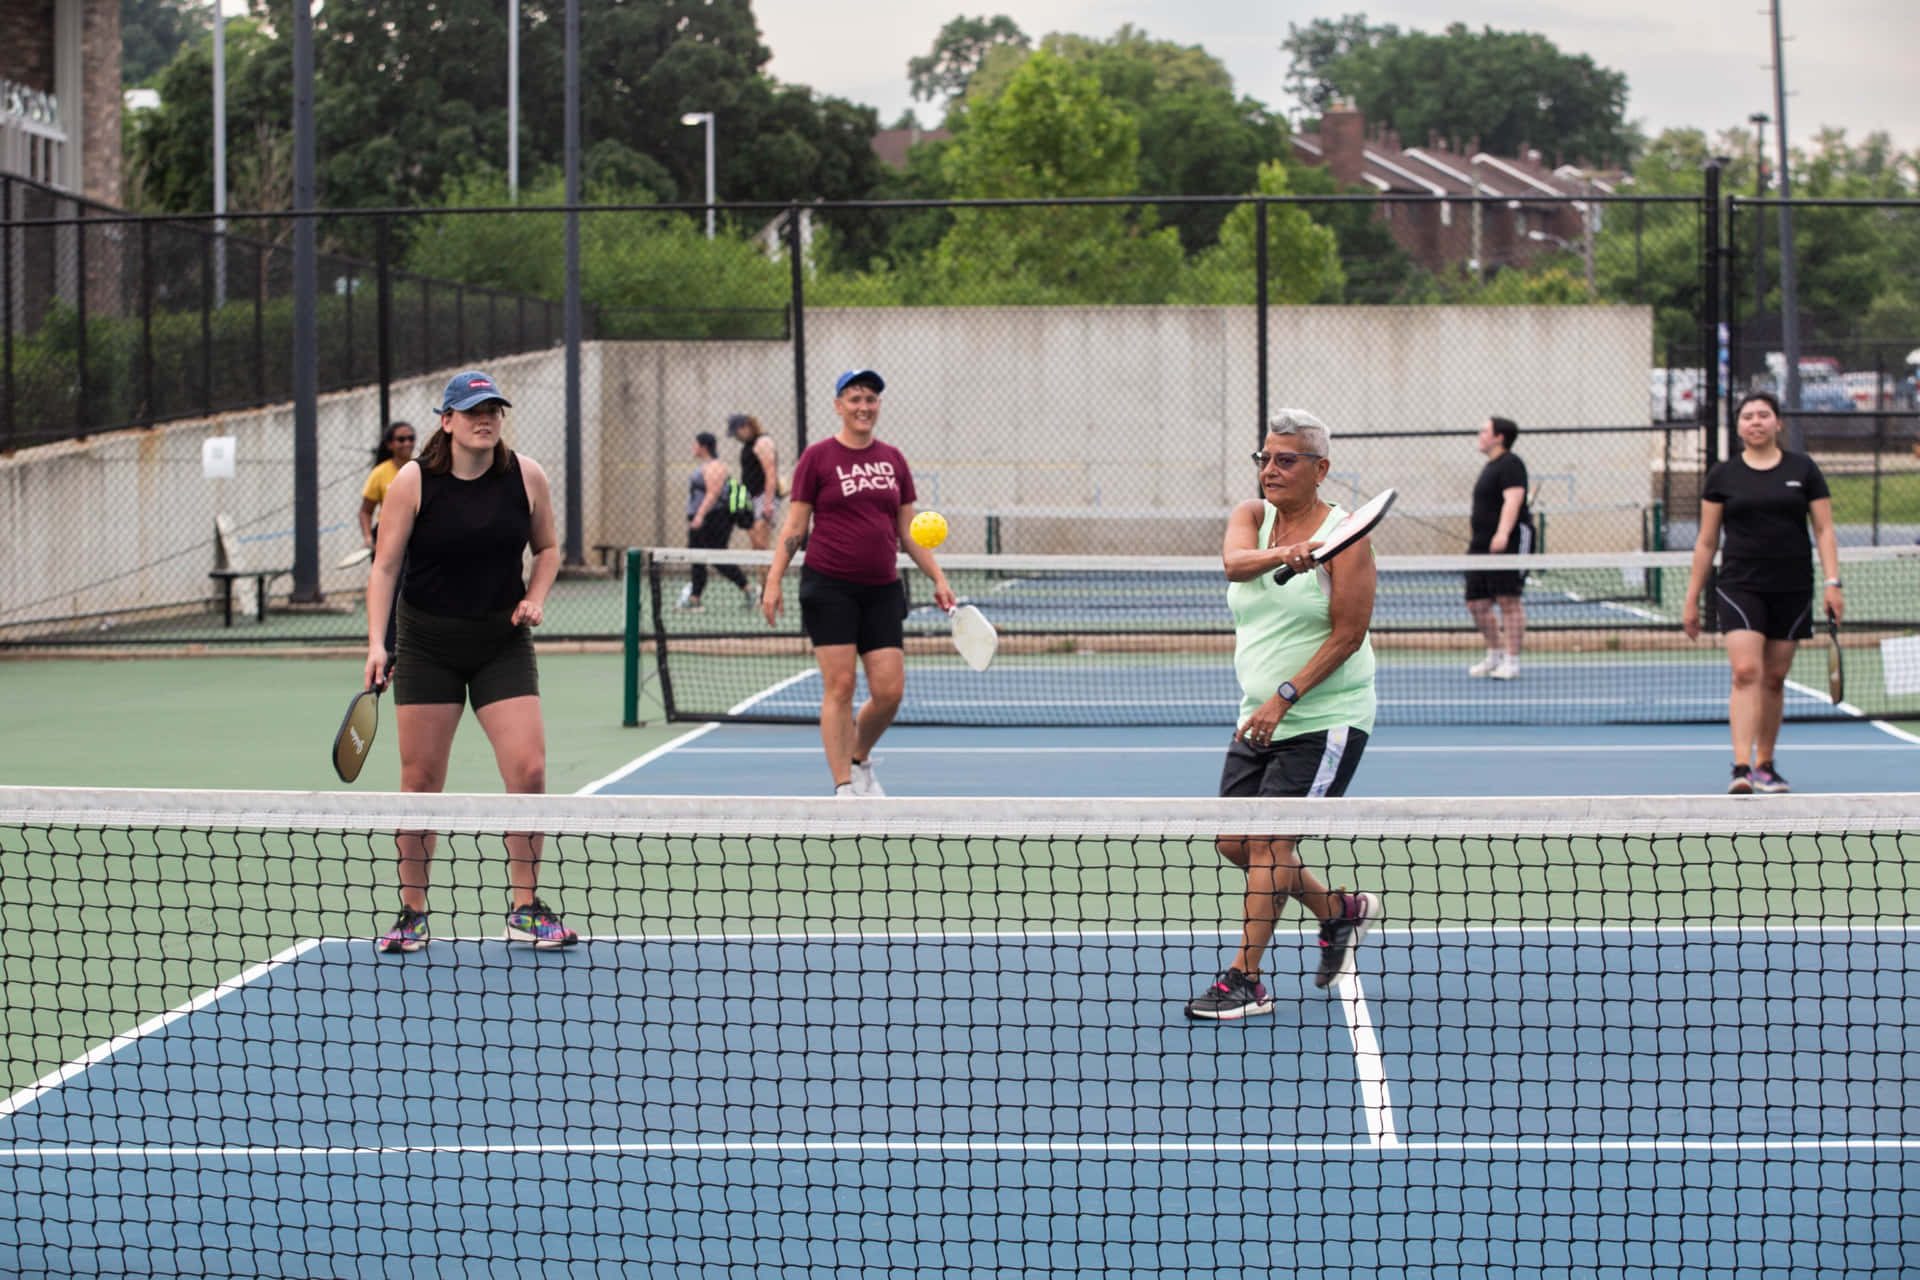 "The Perfect Swing: Achieving Pickleball greatness"